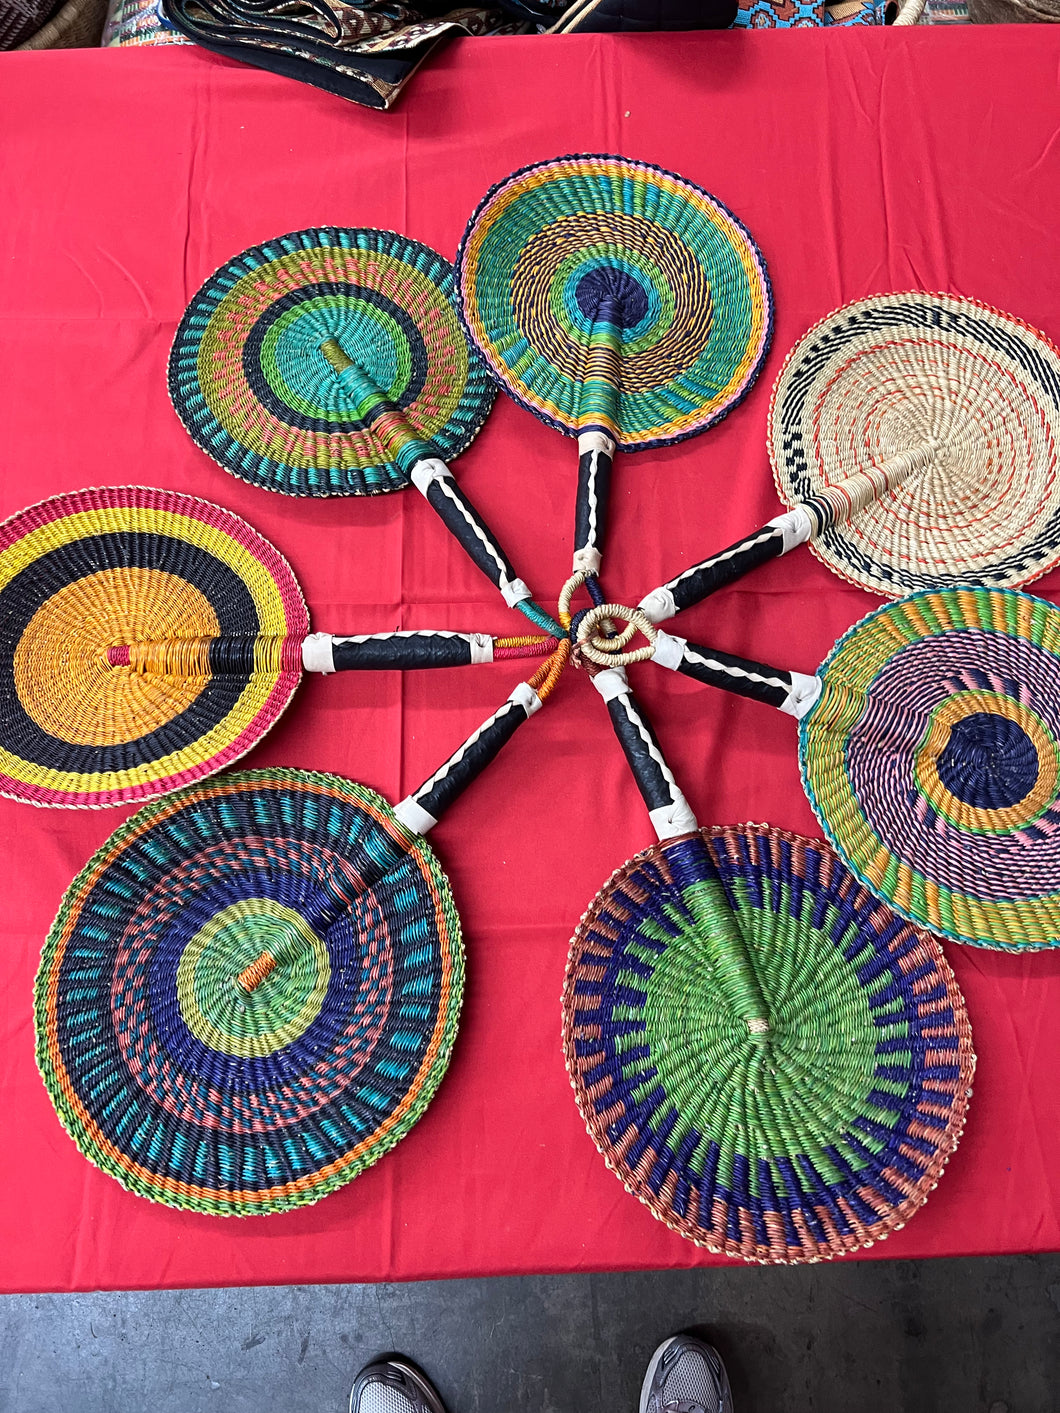 Woven African Fans - Round